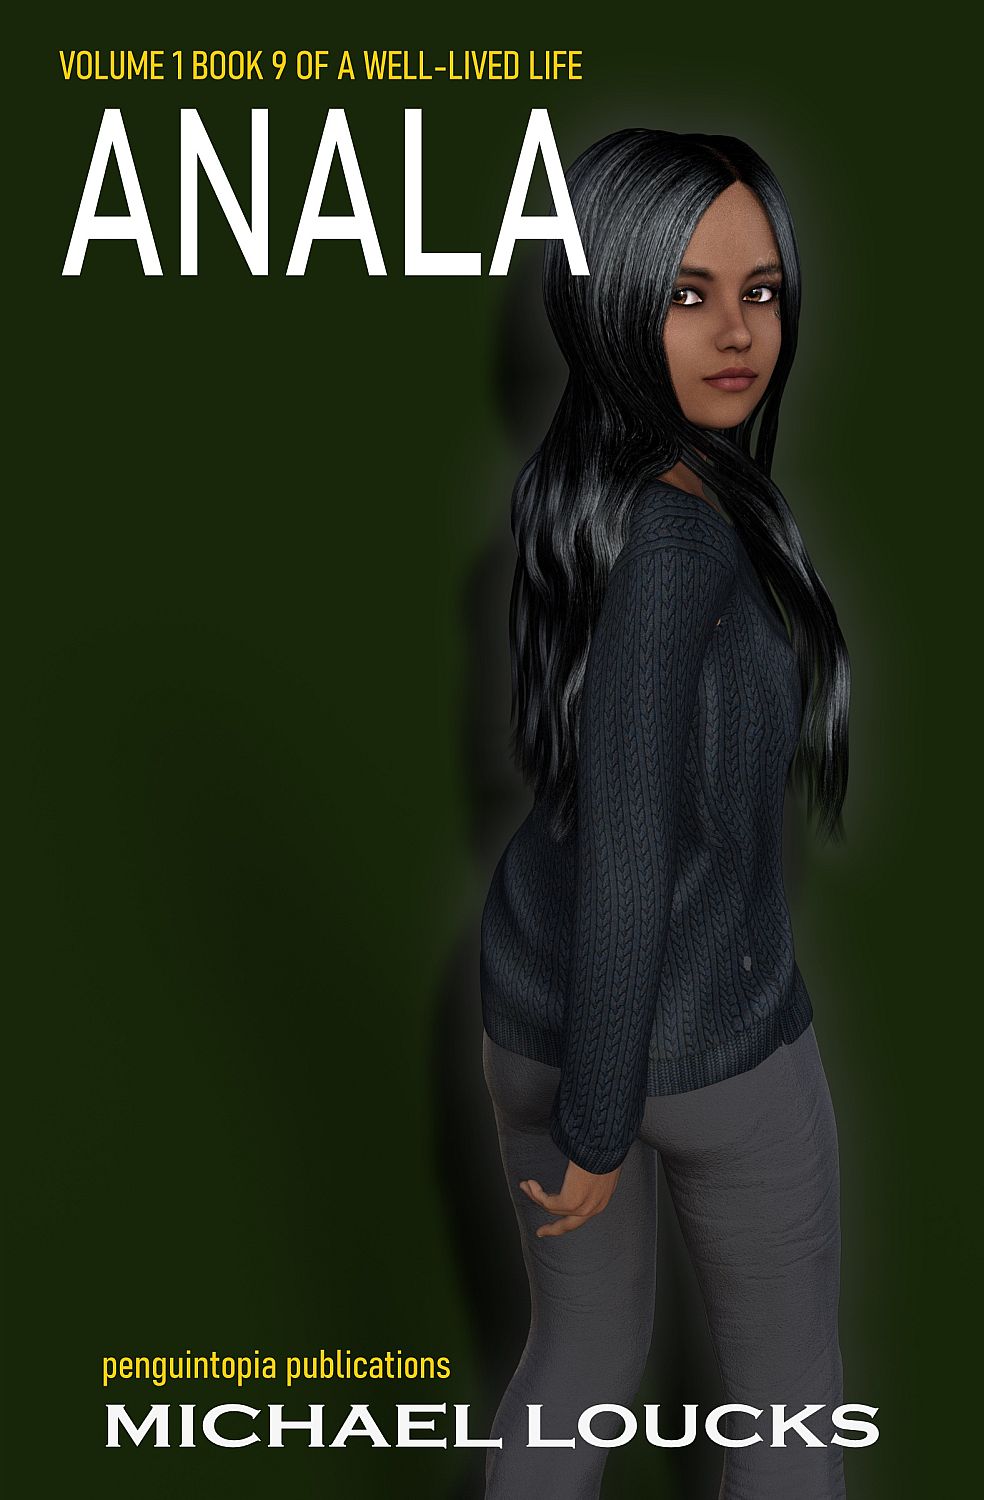 A Well-Lived Life - Book 9 - Anala - Cover